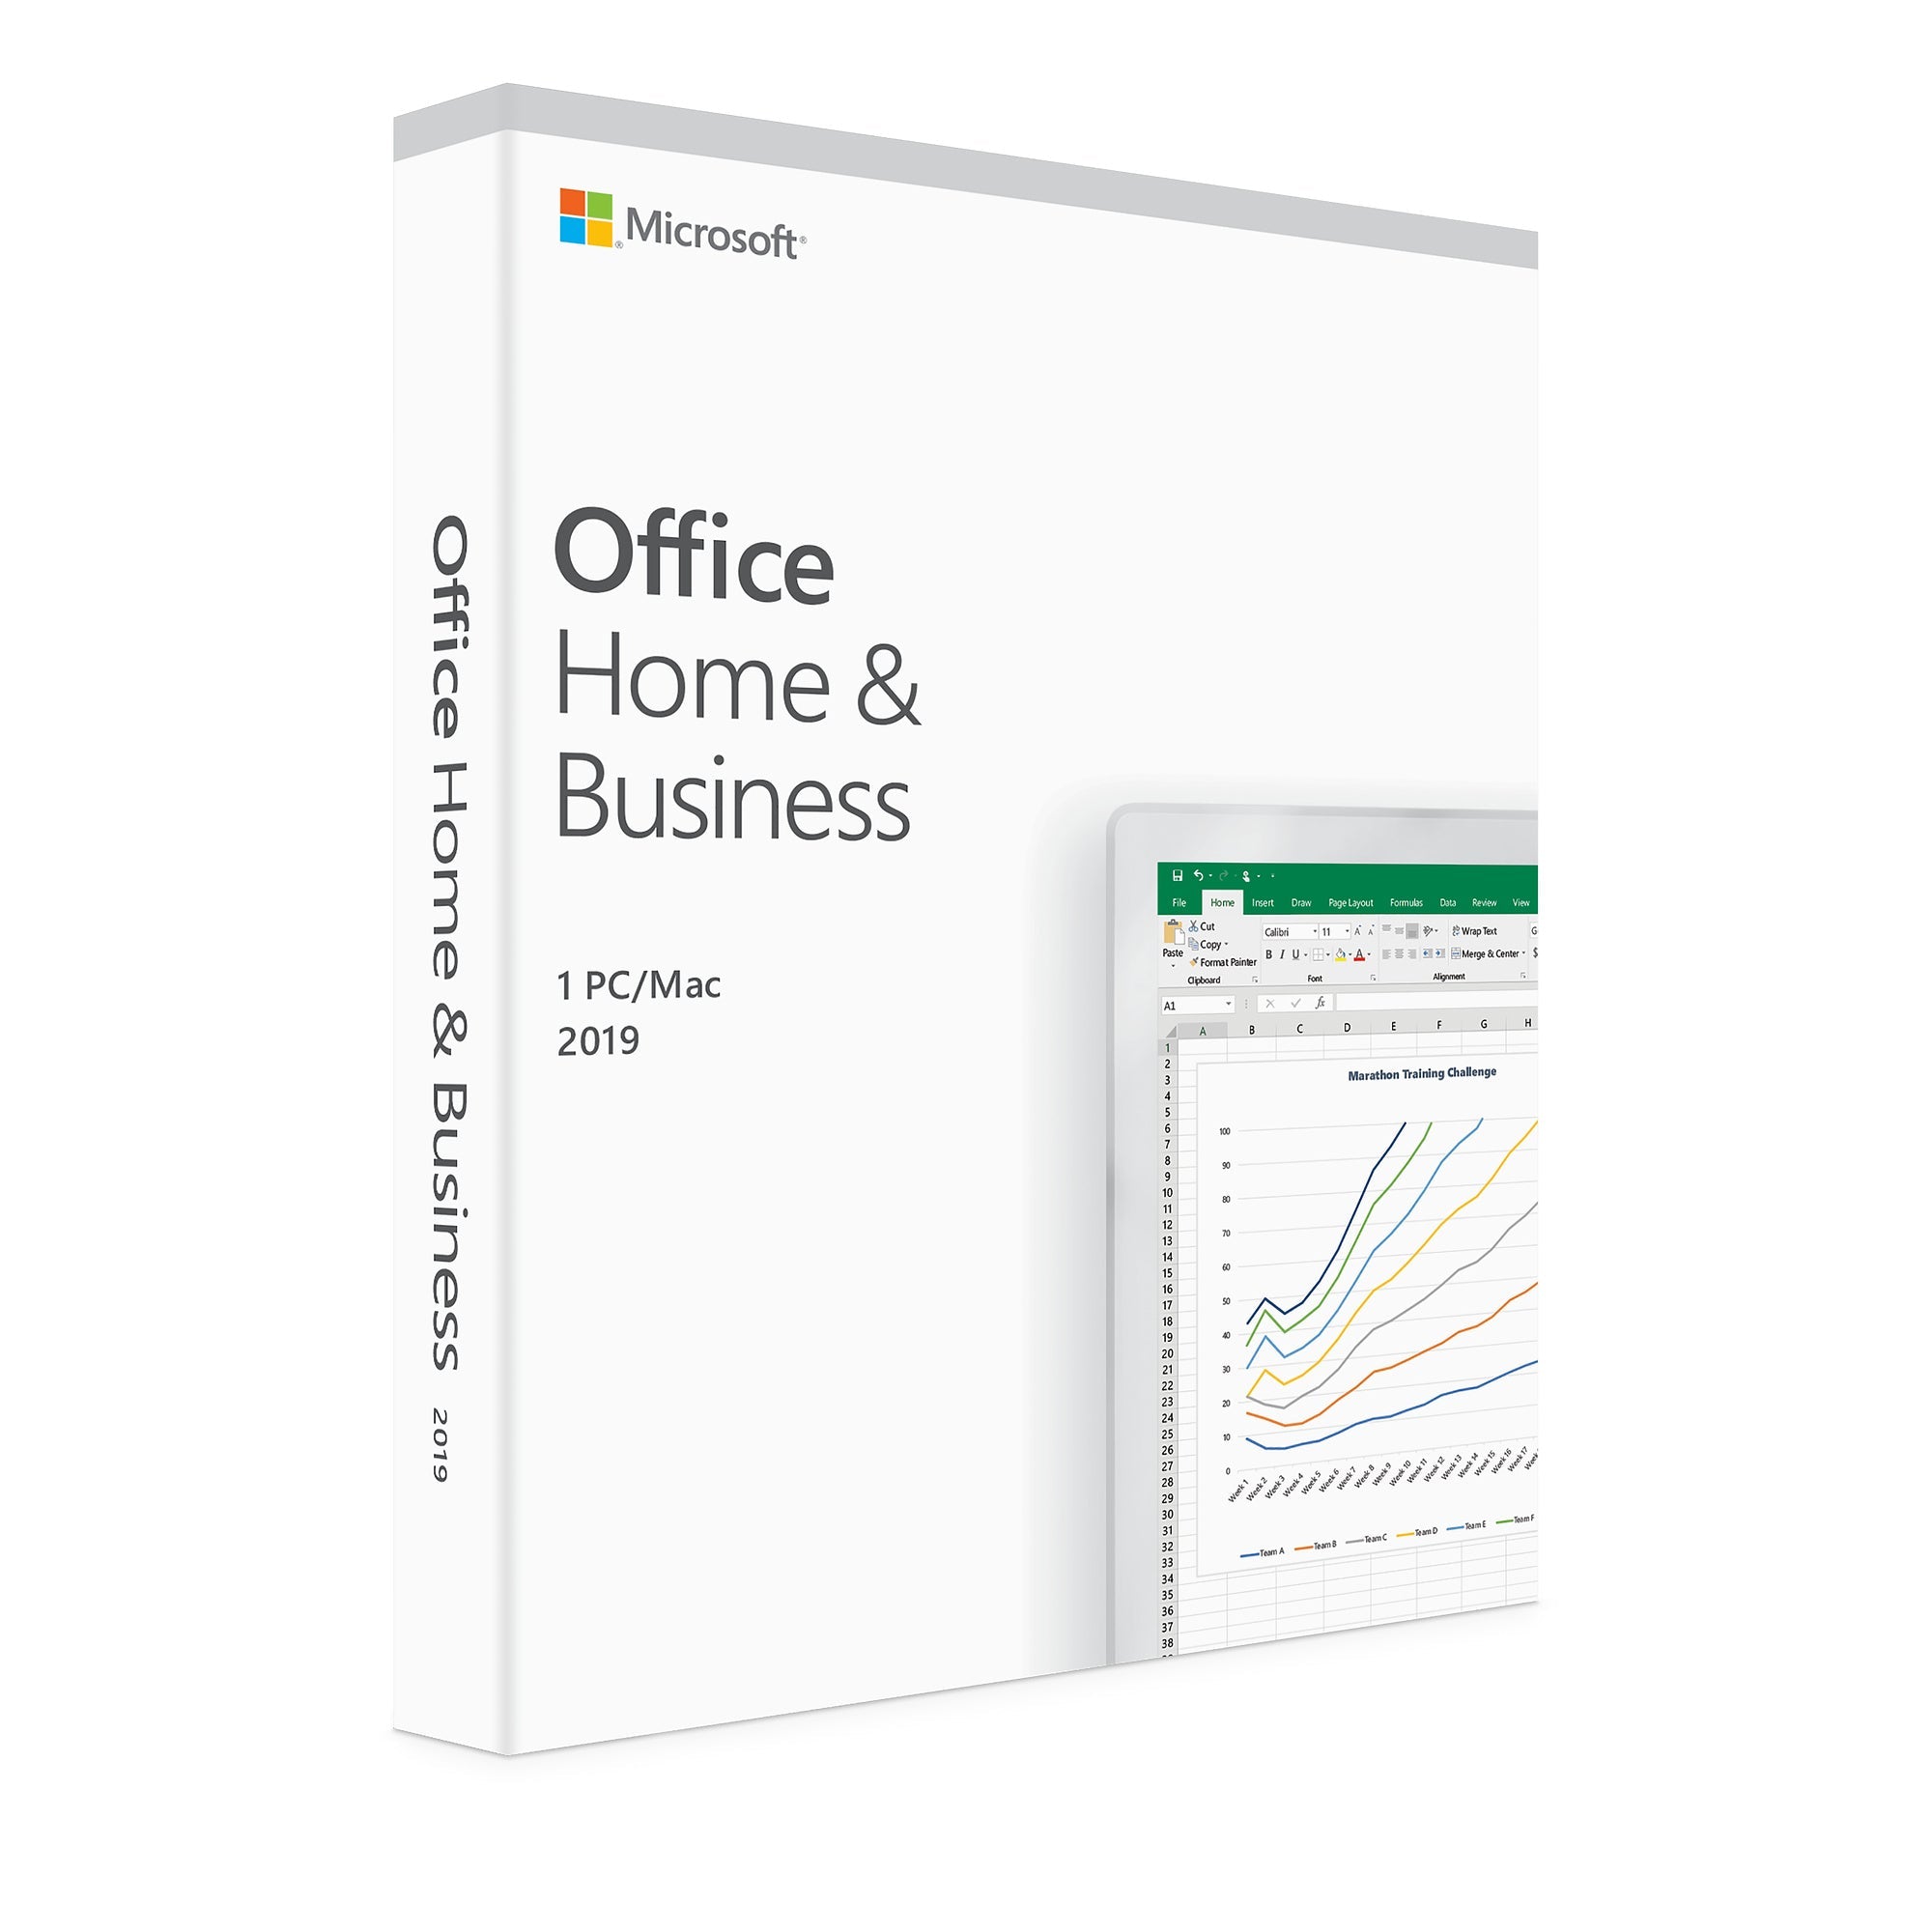 Microsoft Office Home and Business 2019 Til Mac - officepakke.dkMicrosoft Office Home and Business 2019 Til Macofficepakke.dkofficepakke.dk